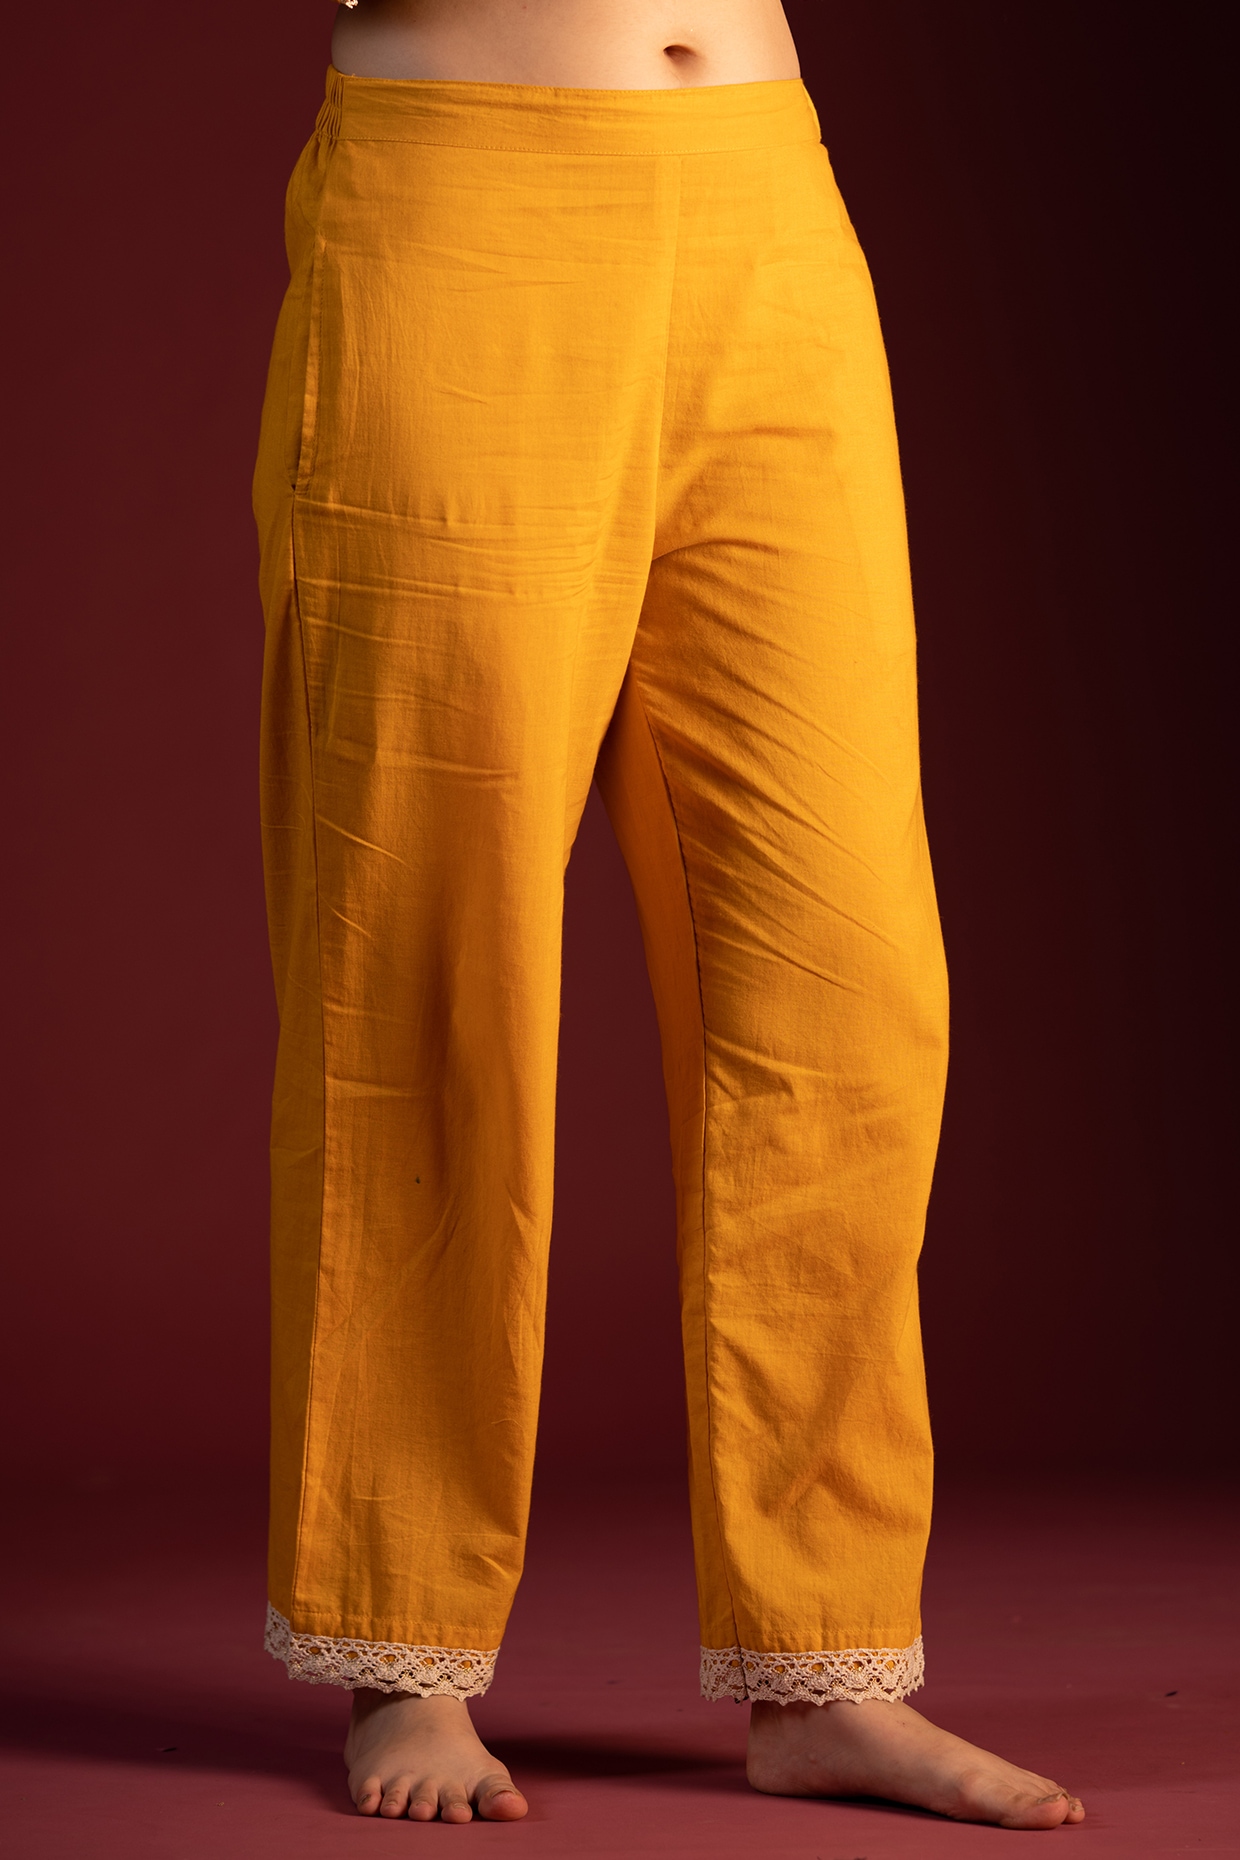 Mens Traditional Indian Churidar Pants - Off-White | In-Sattva